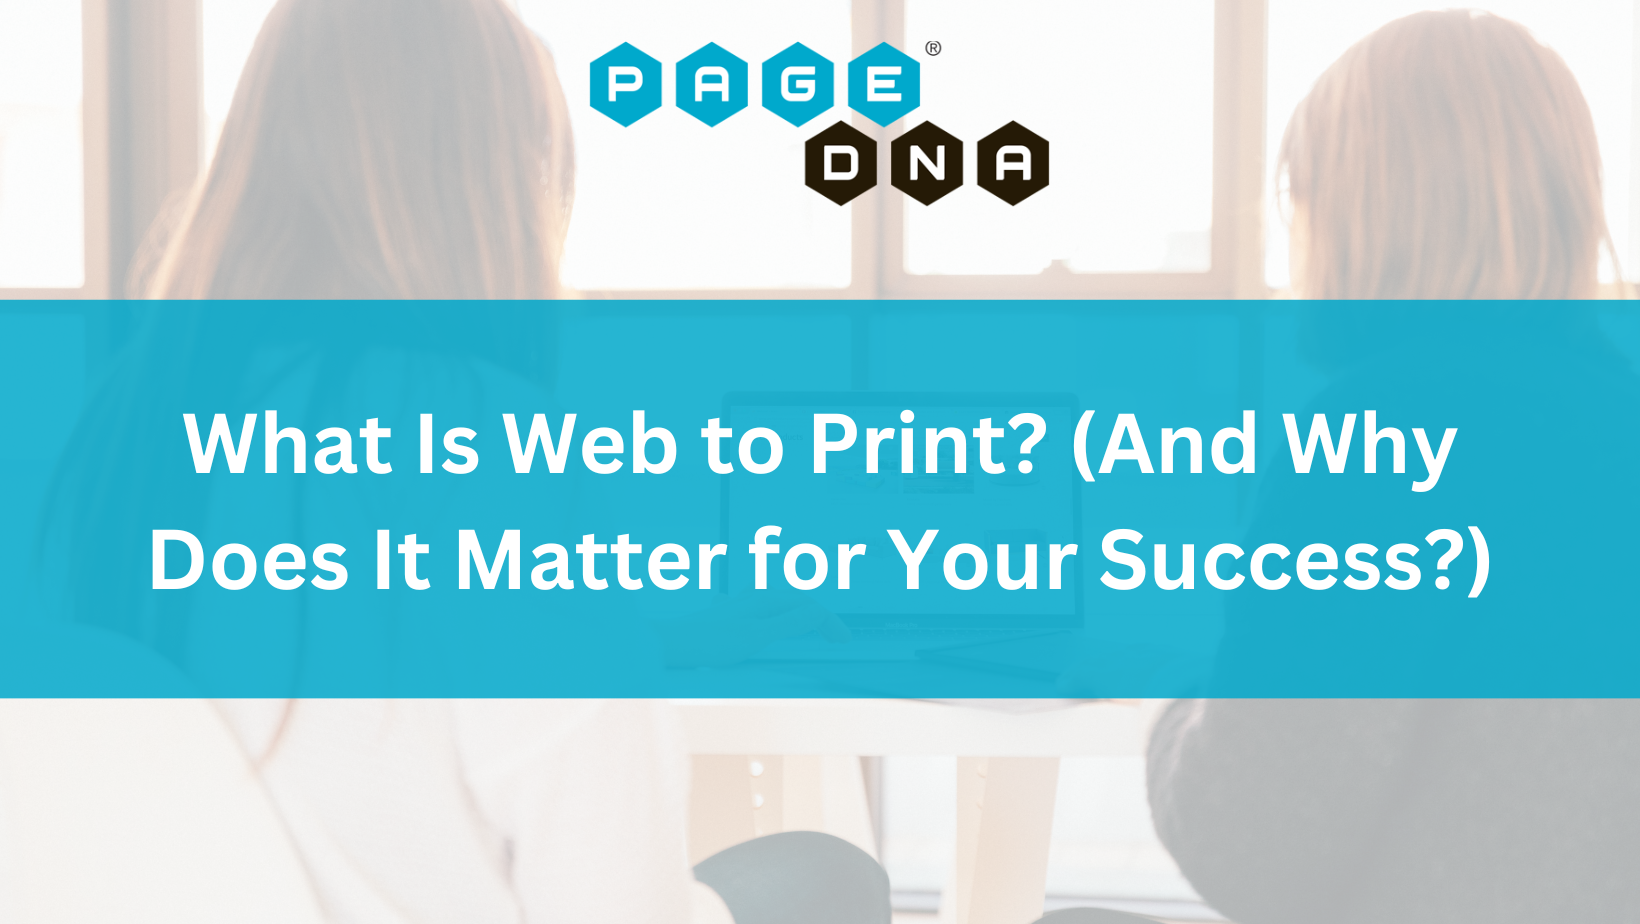 What Is Web to Print? (And Why Does It Matter for Your Success?)